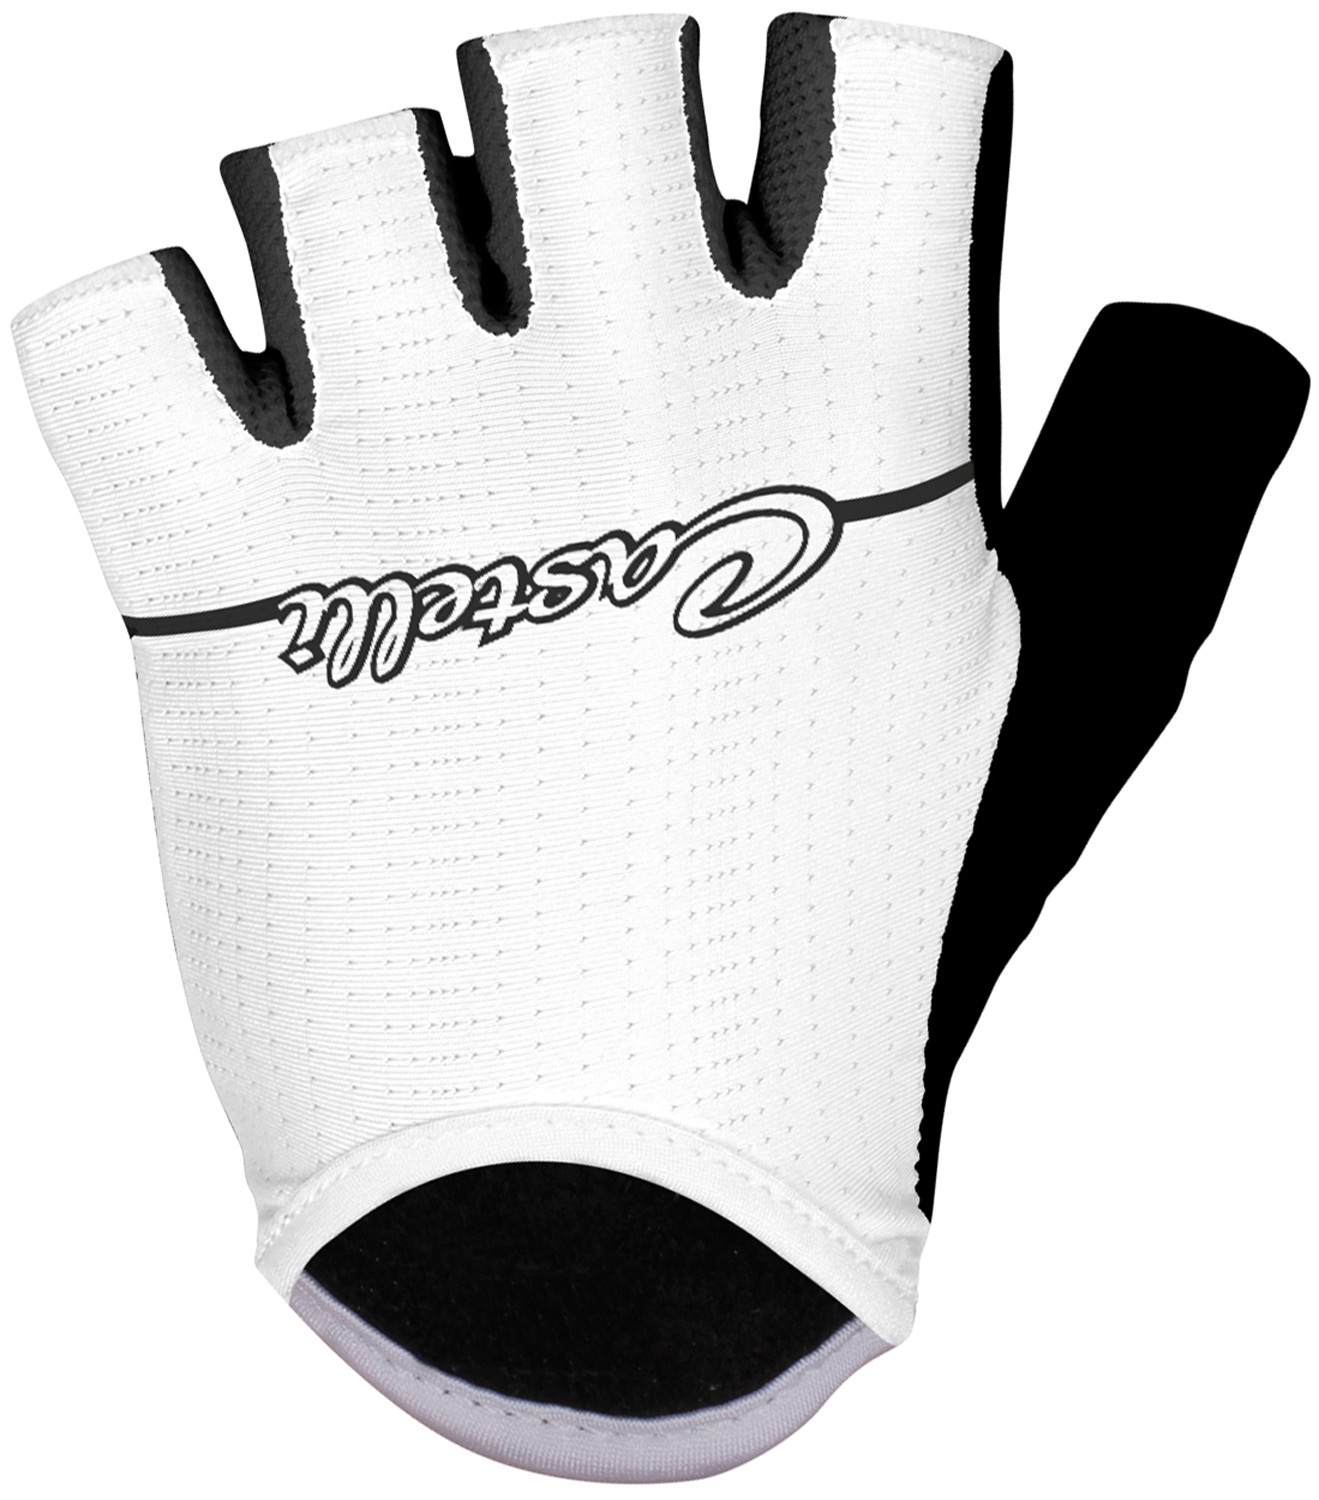 DOLCISSIMA W GLOVE - Women's cycling gloves